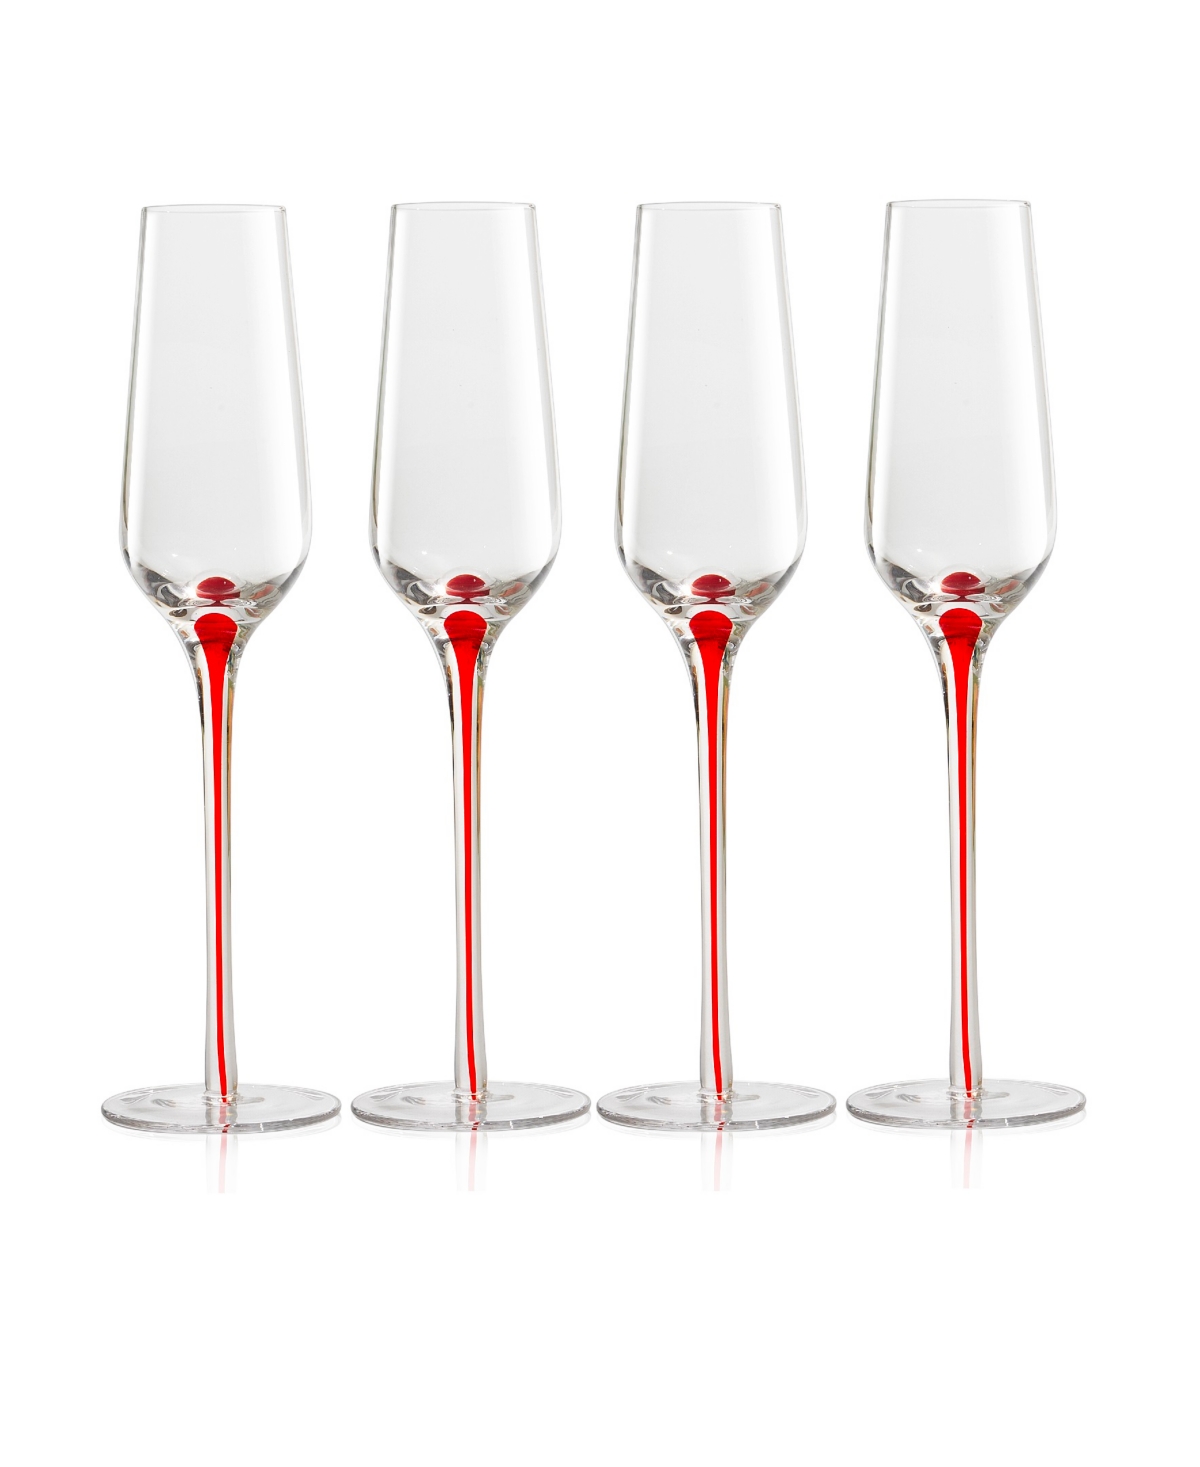 Qualia Glass Tempest Flutes, Set Of 4 In Clear,red